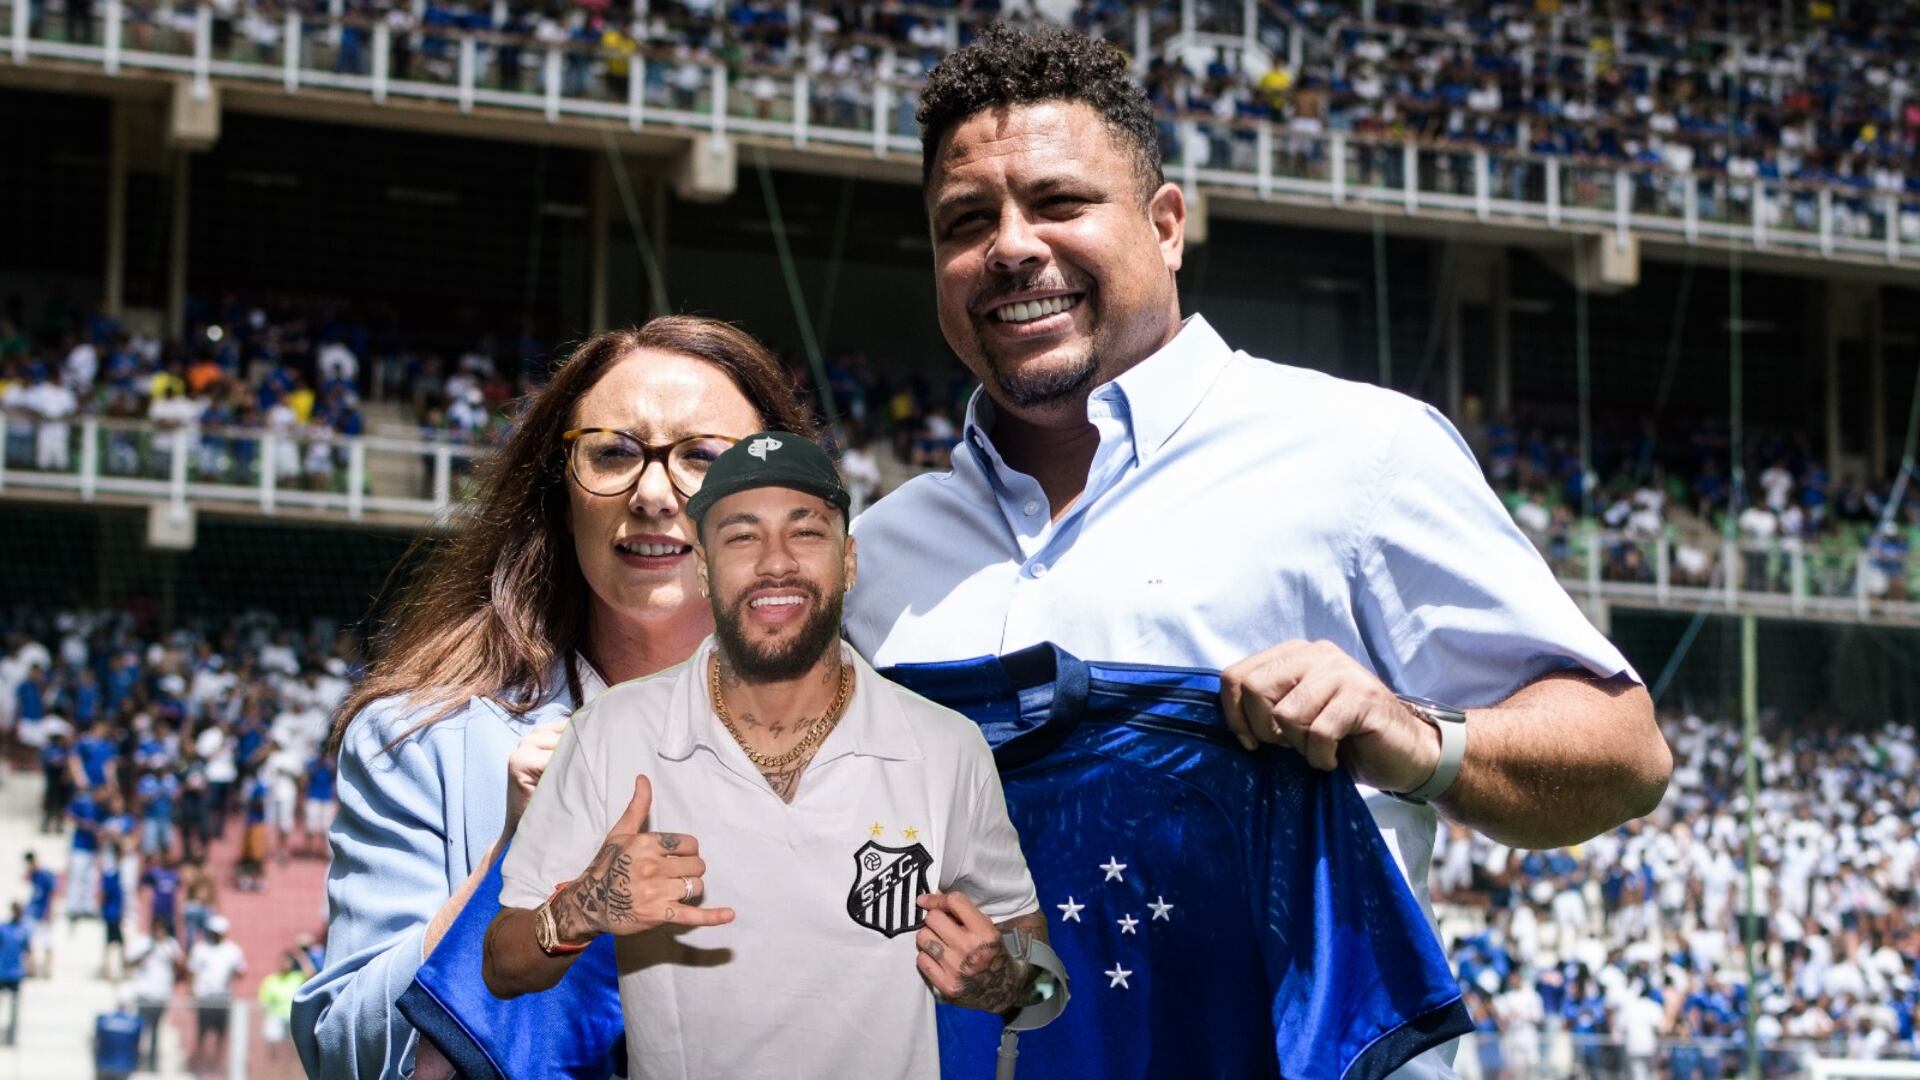 While Ronaldo sold Cruzeiro, what Neymar wants to do with Santos in the future